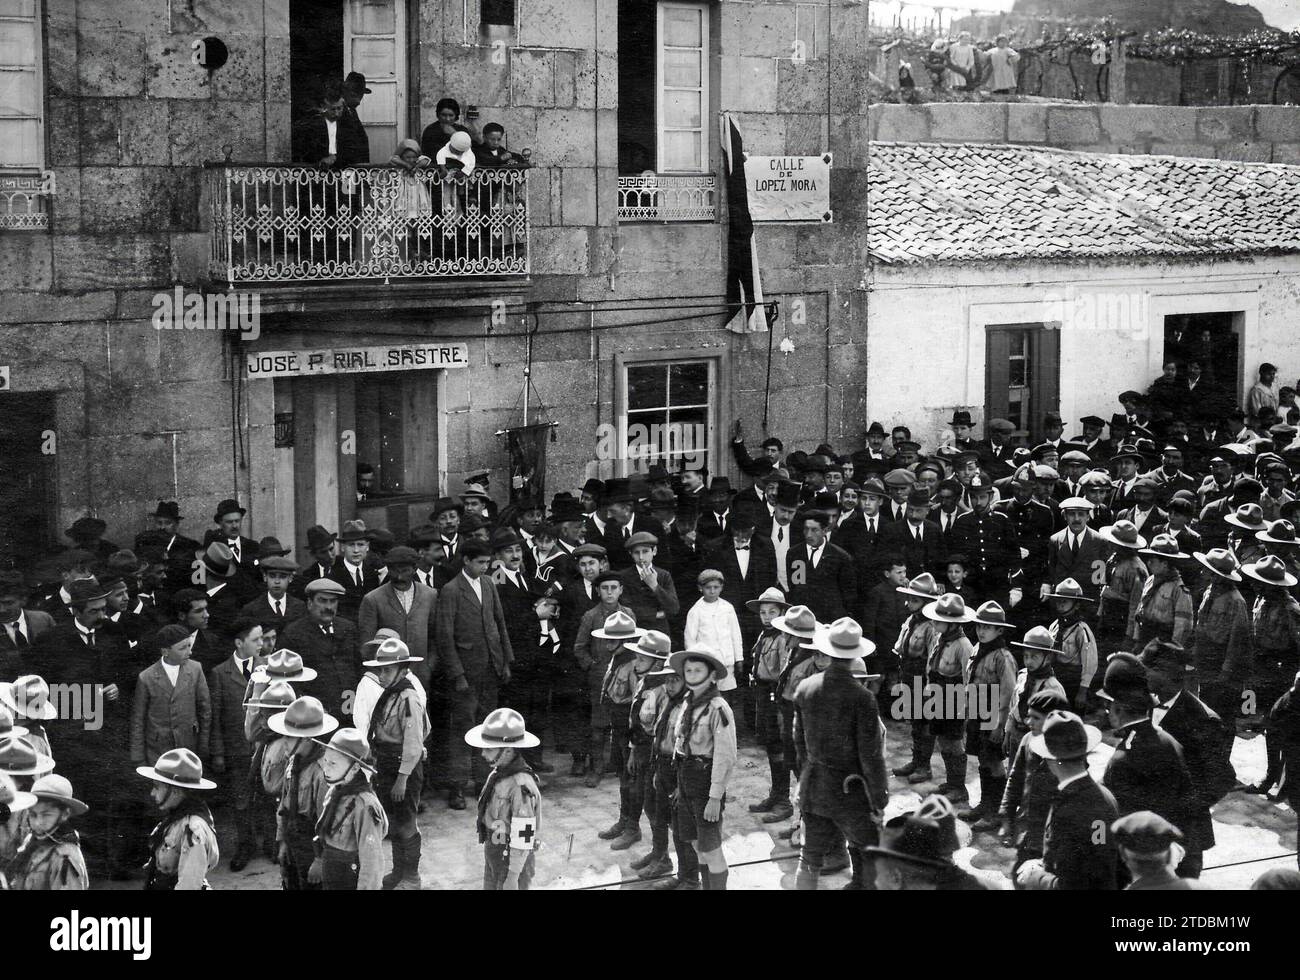 03/31/1918. Tribute to an Illustrious patrician, in Vigo. Discovery of the tombstone that gives the name of López Mora on a street in the city. Photo: Jaime Pacheco. Credit: Album / Archivo ABC / Pacheco Stock Photo